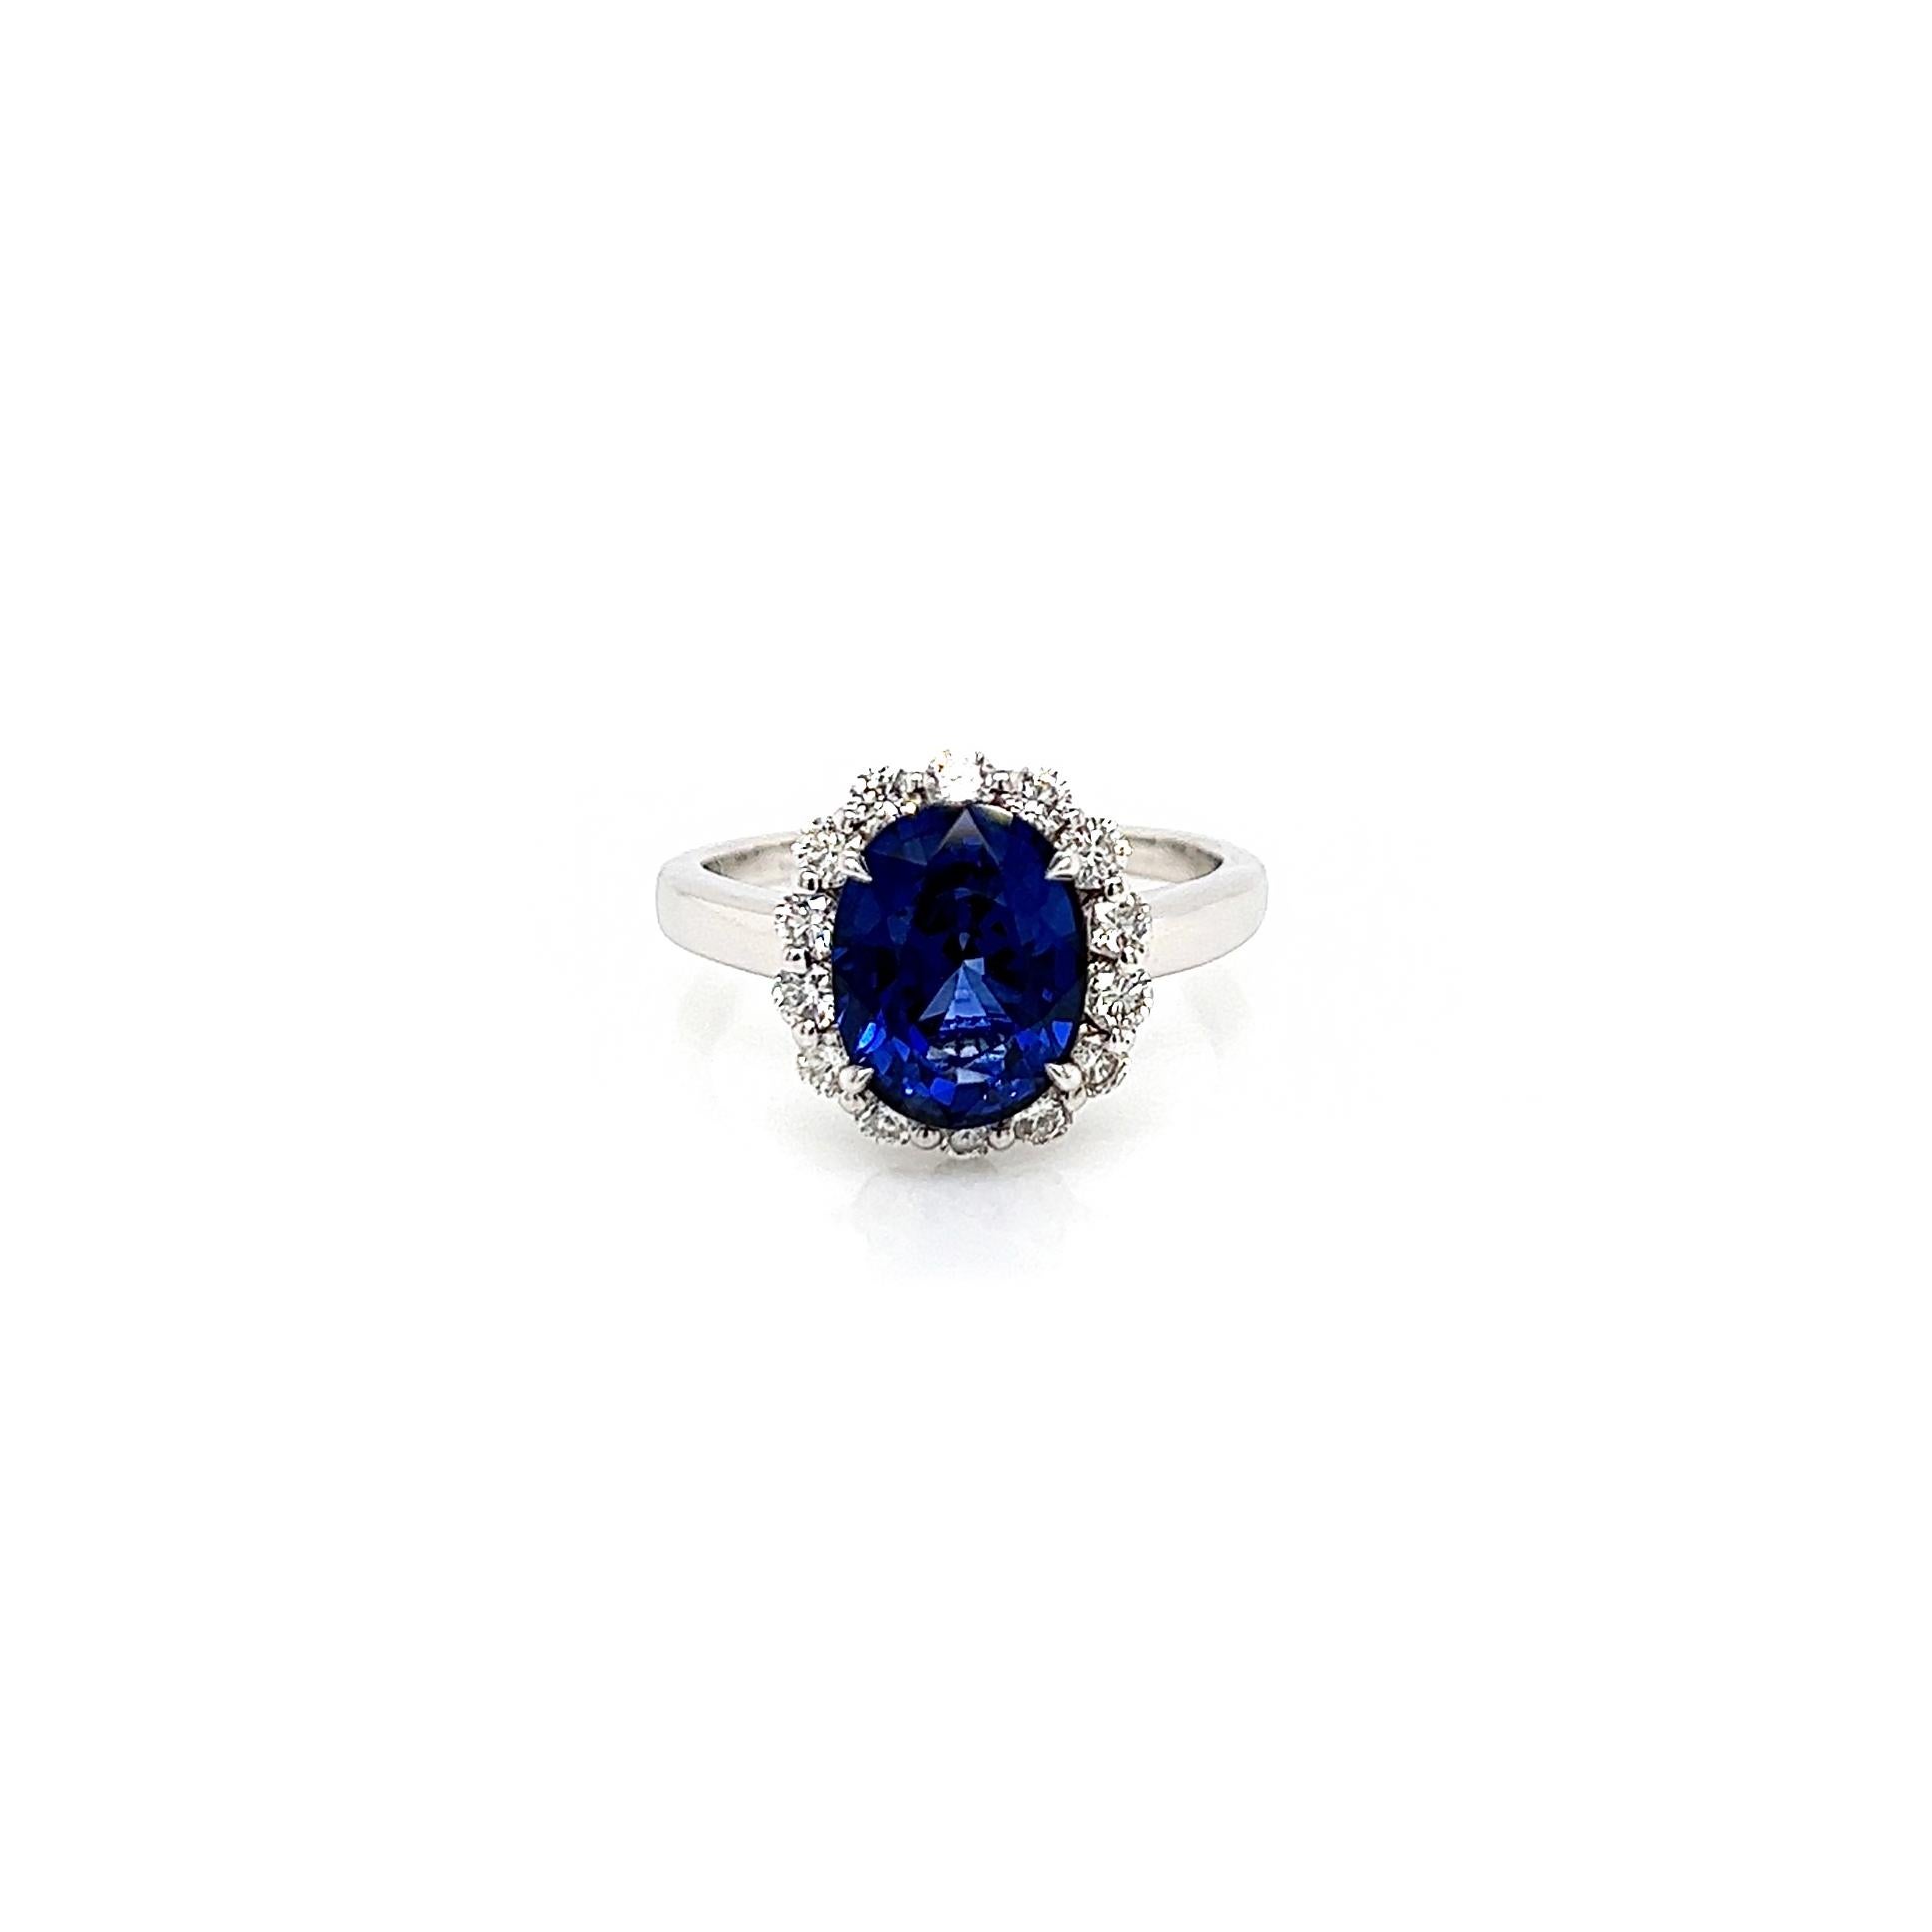 3.75 Total Carat Sapphire and Diamond Halo Ladies Engagement Ring

-Metal Type: 18K White Gold
-3.22 Carat Oval Cut Natural Blue Sapphire, Heat Treated
-0.53 Carat Round Natural side Diamonds. F-G Color, VS-SI Clarity 

-Size 6.25

Made in New York